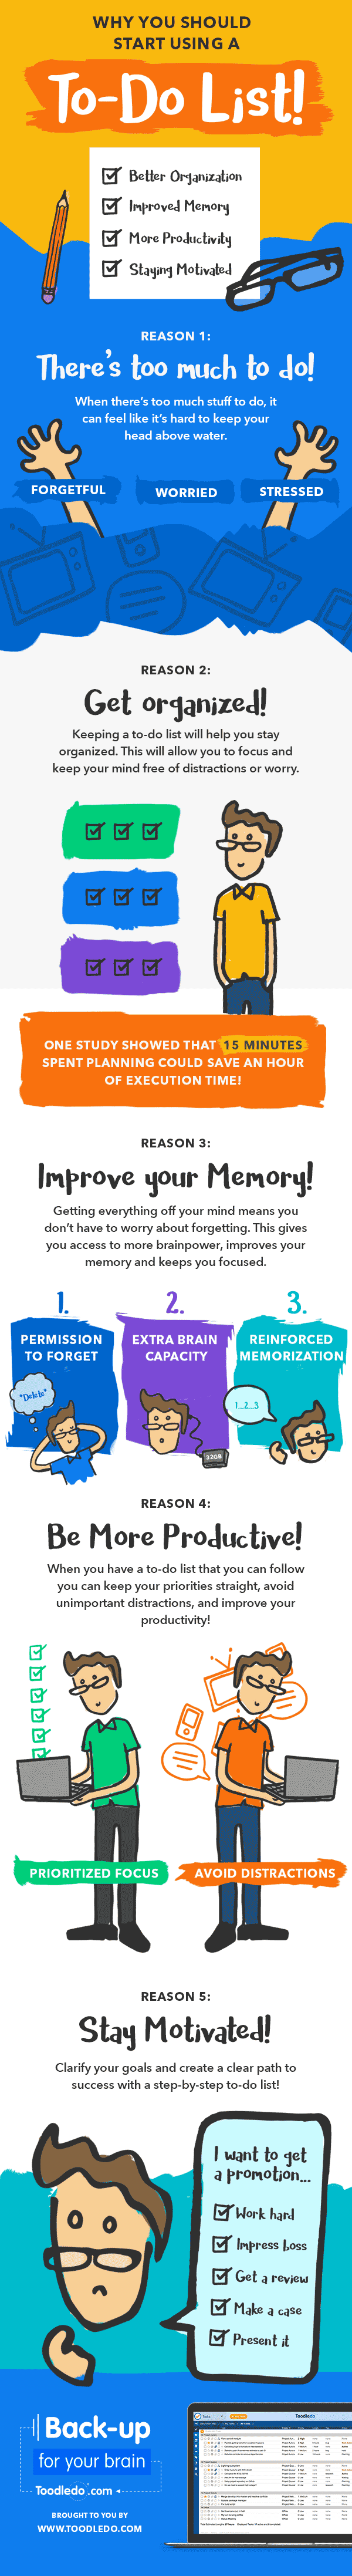 Get organized, improve your memory, increase your productivity and stay motivated. Our infographic explains the 5 reasons you should start using a to-do list today!